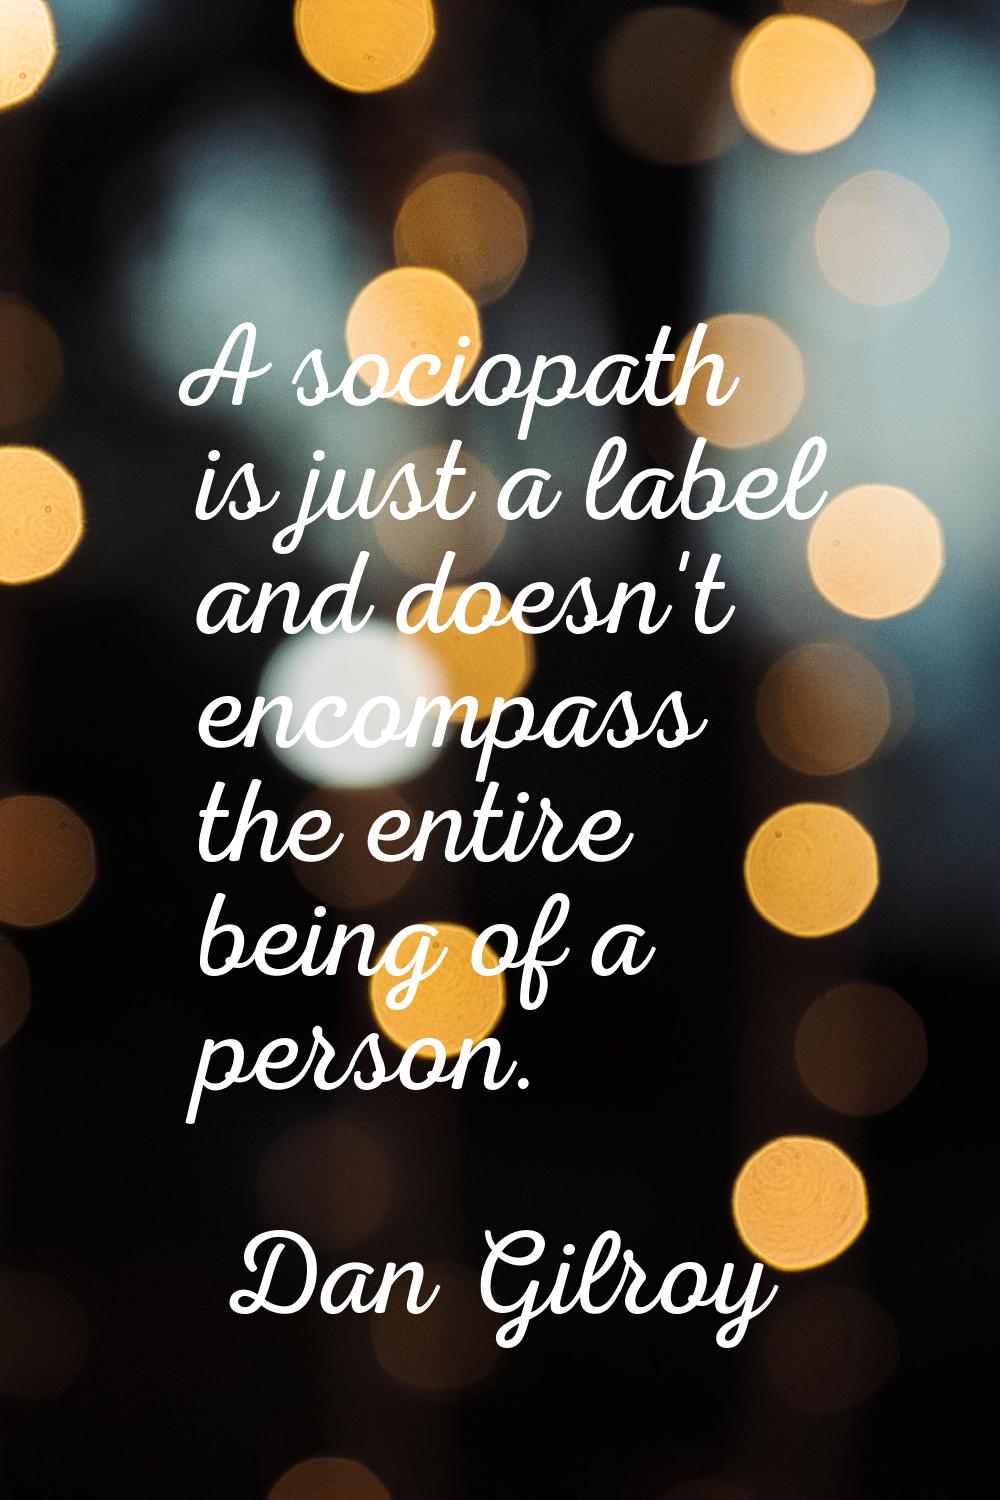 A sociopath is just a label and doesn't encompass the entire being of a person.